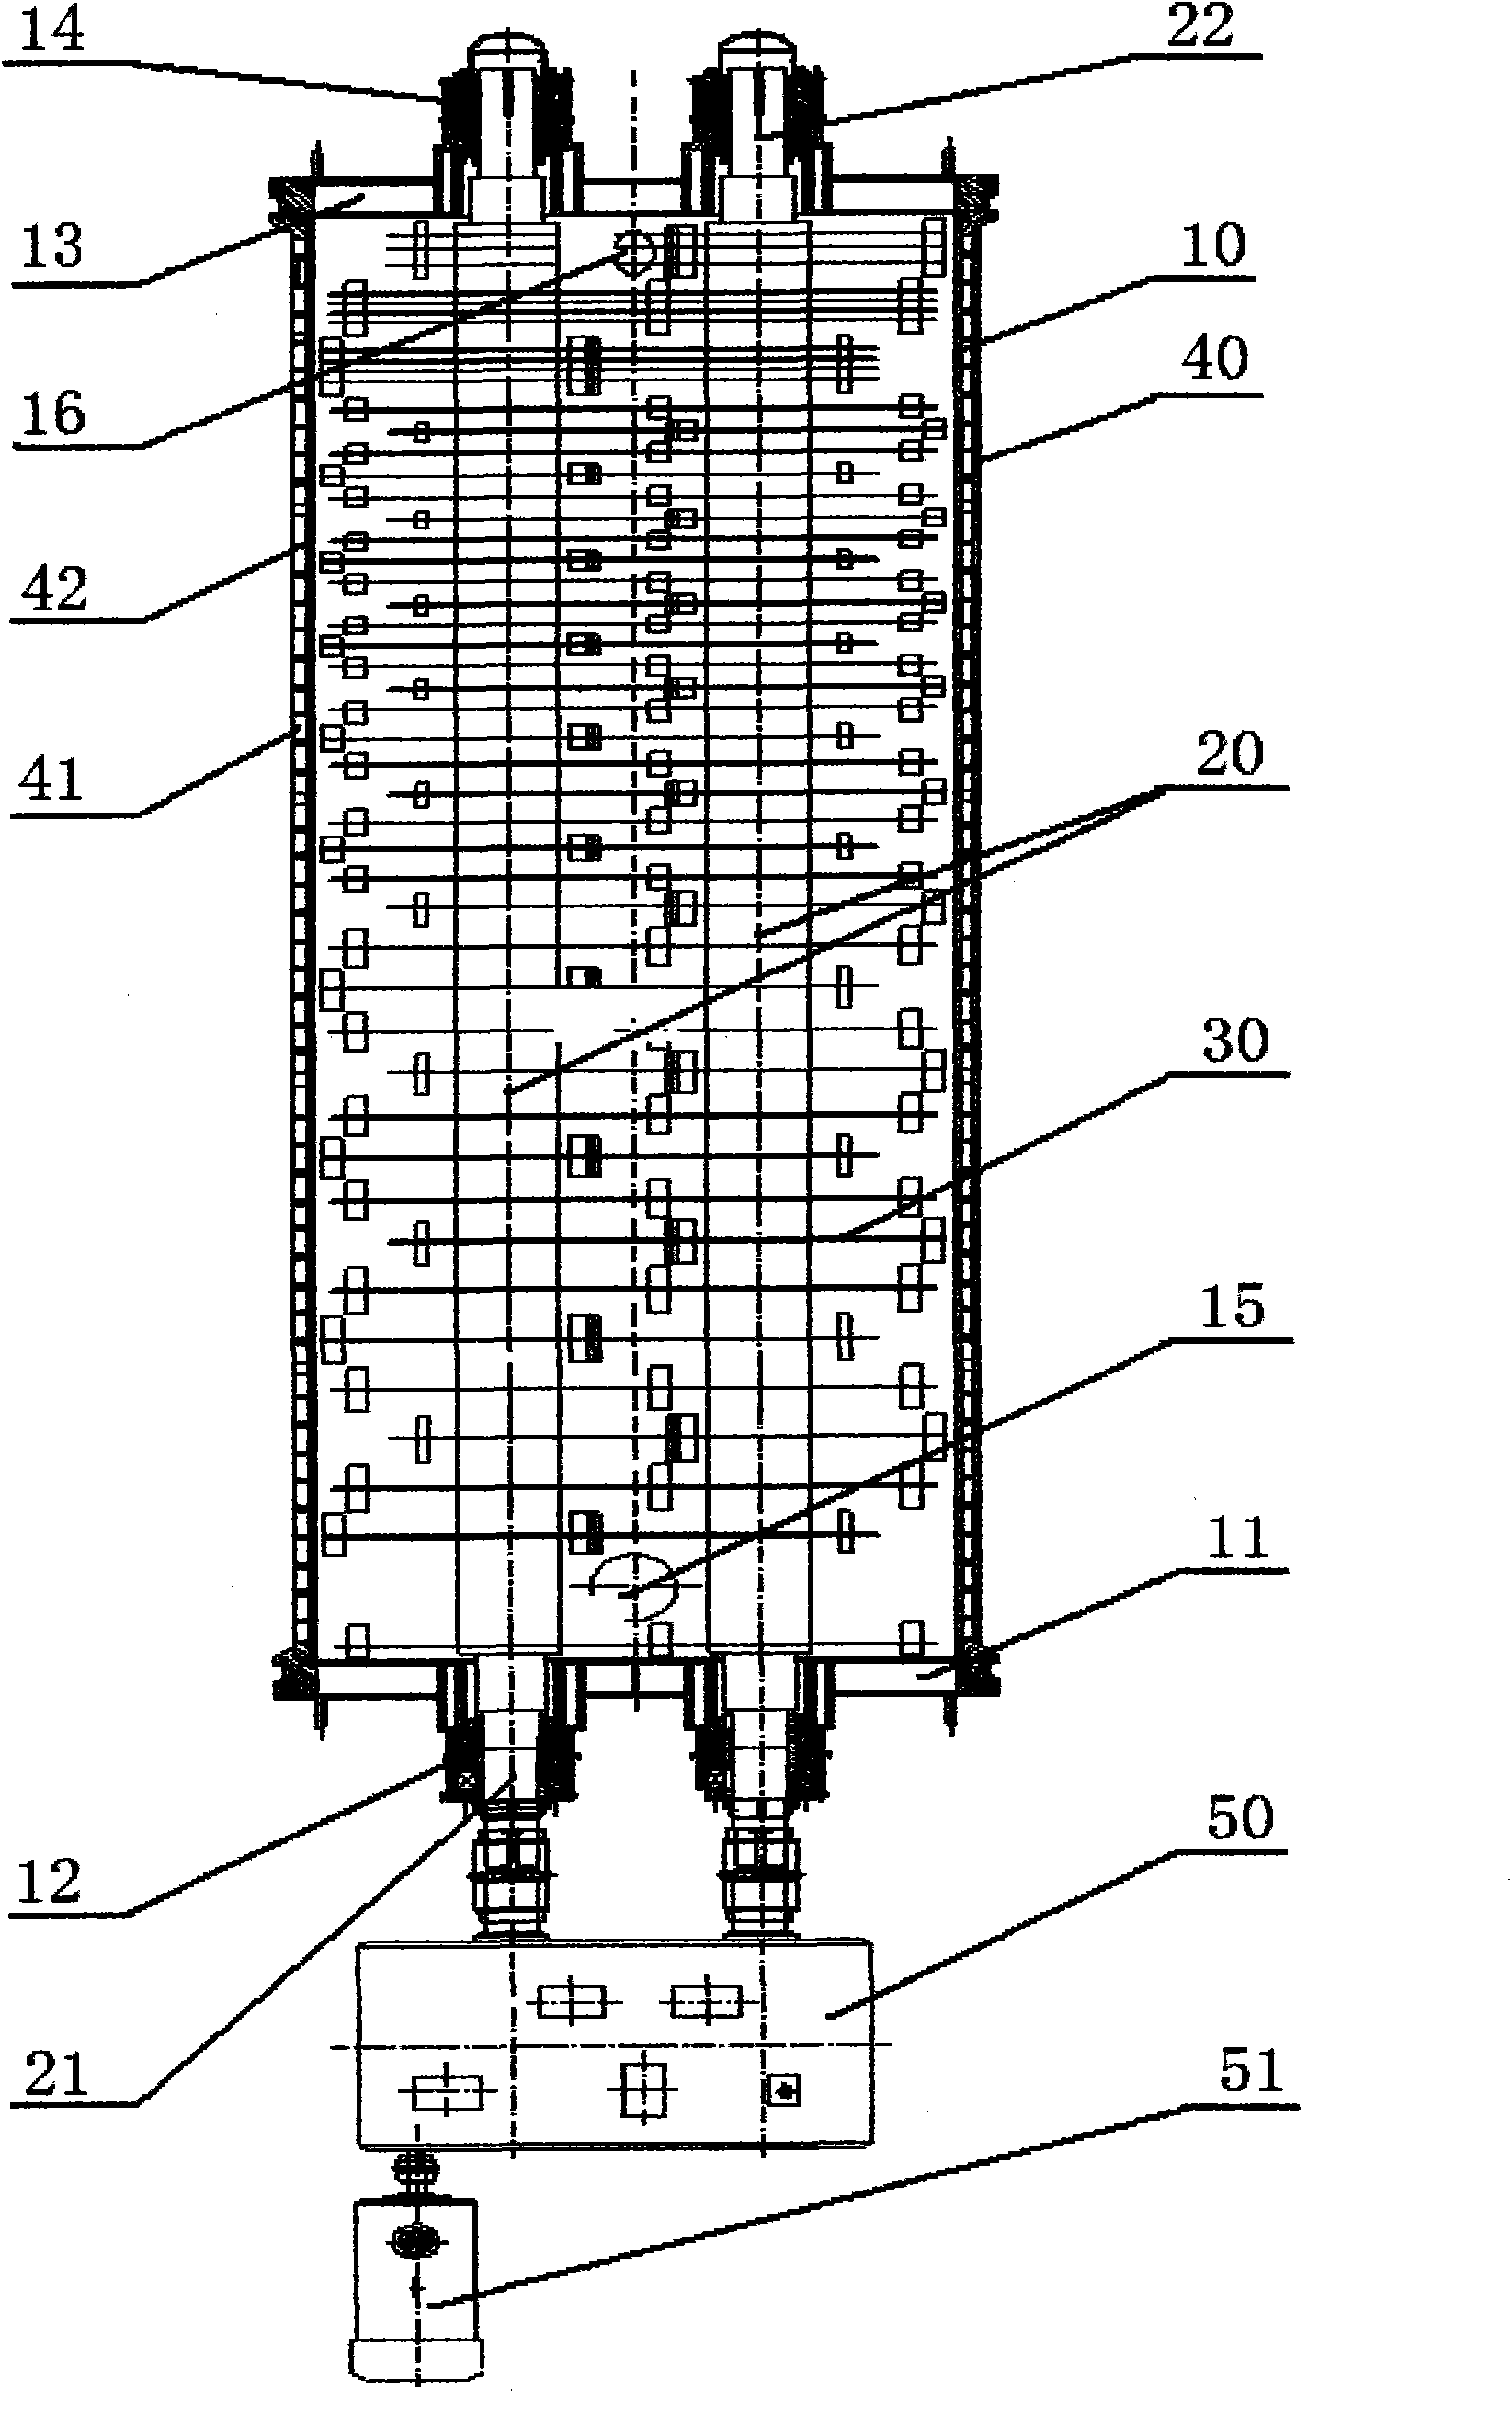 Self-cleaning polymerization reactor